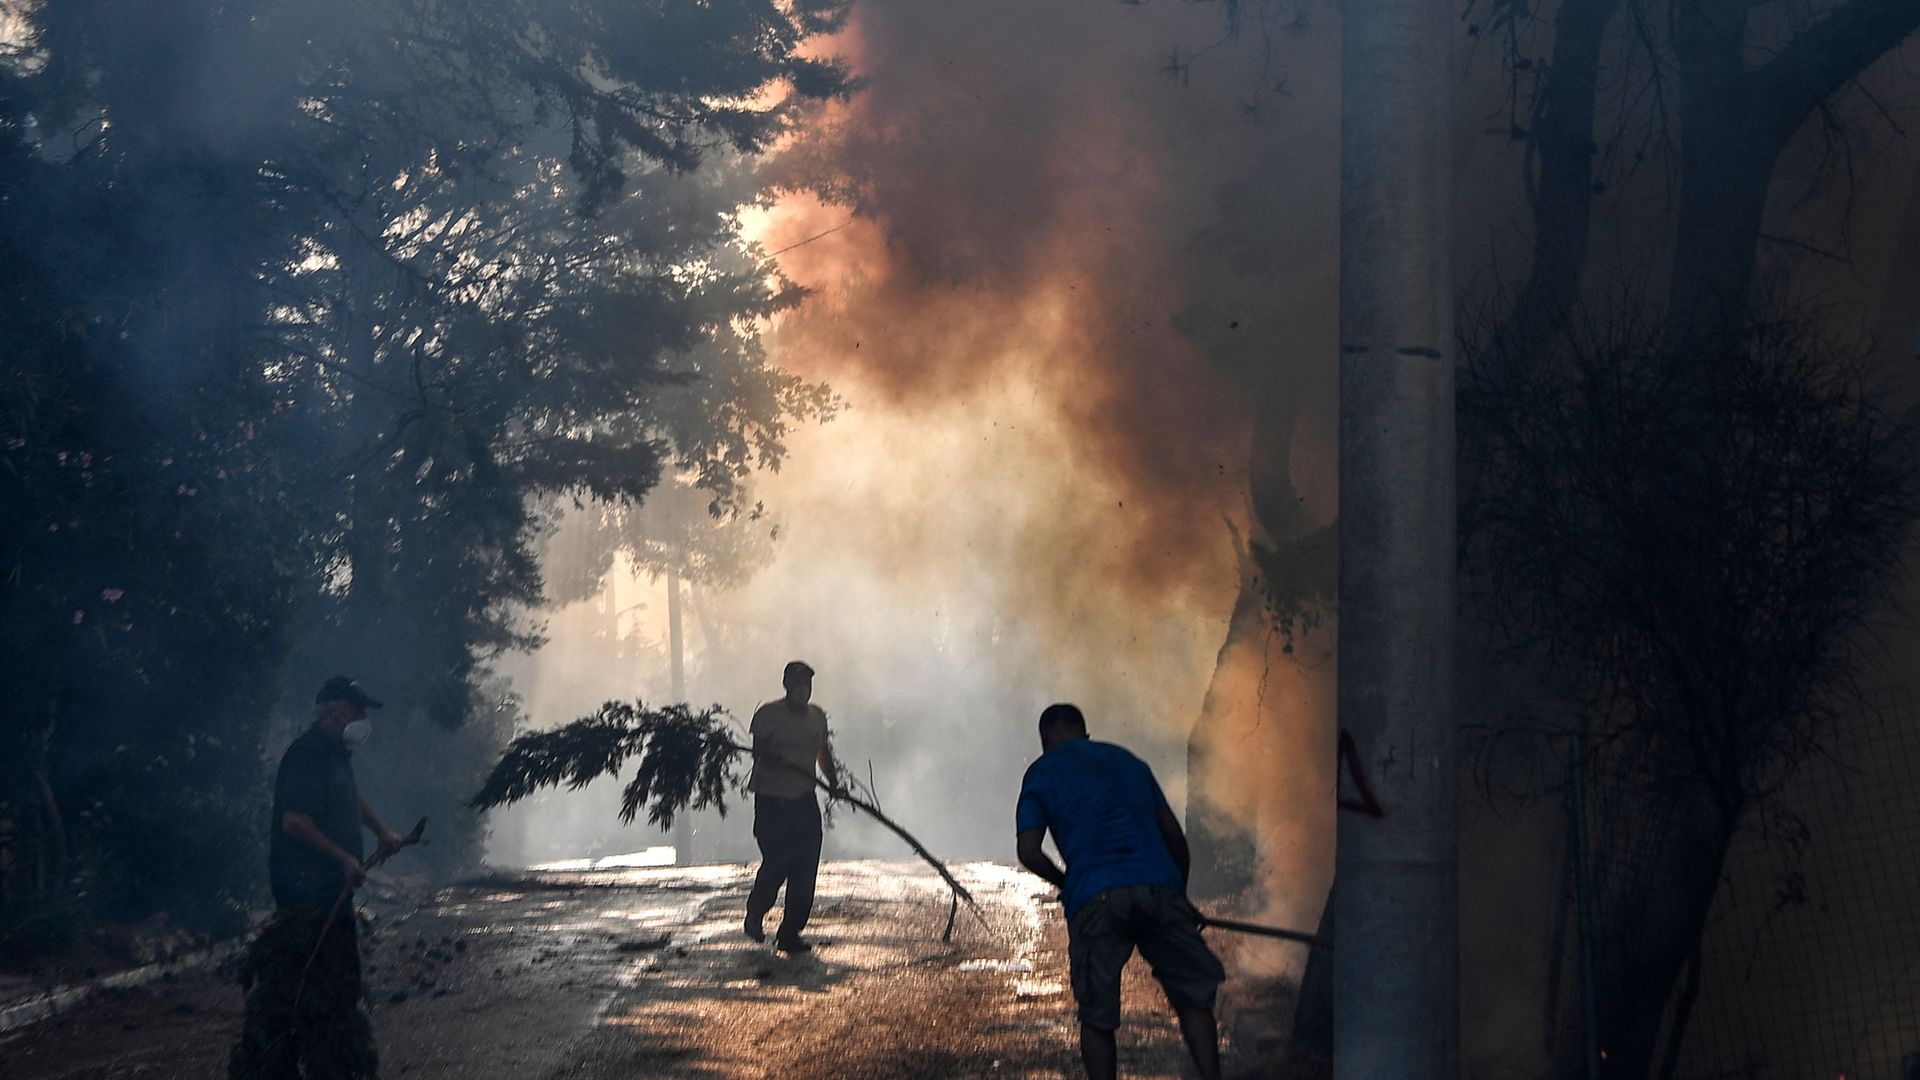 Local residents use tree branches to fight a fire restart in Thrakomakedones, near Mount Parnitha, north of Athens, on August 7, 2021.